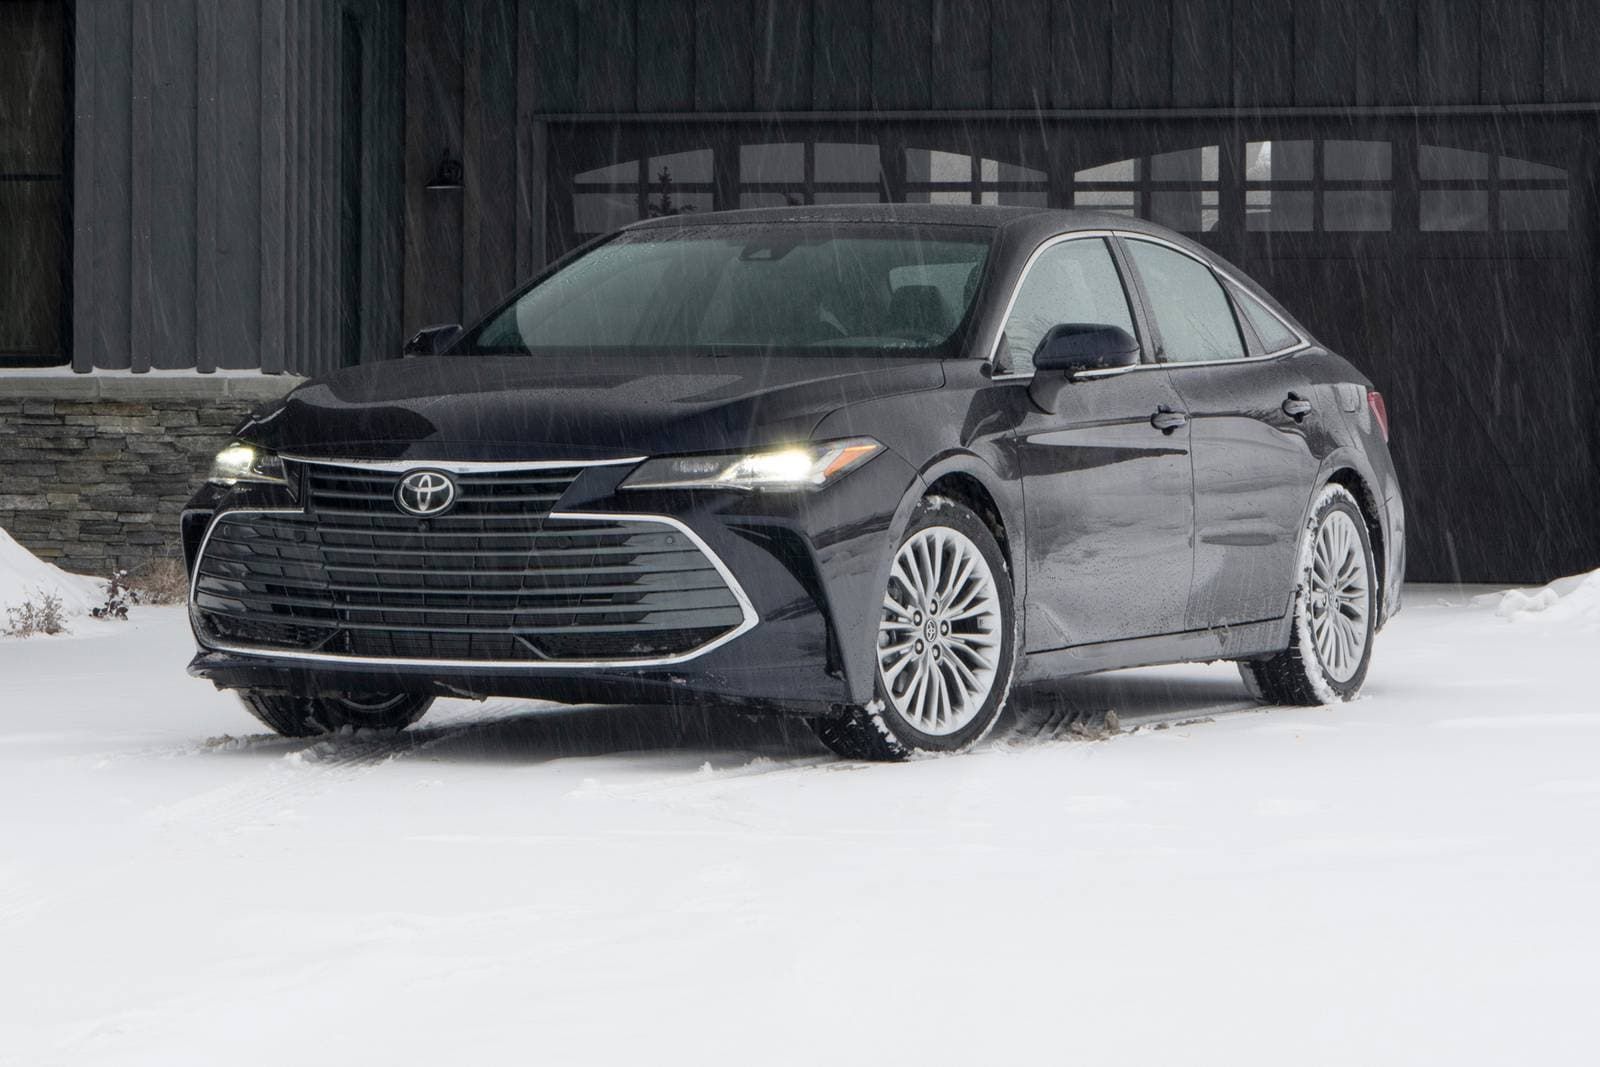 10 Things About the 2021 Toyota Avalon